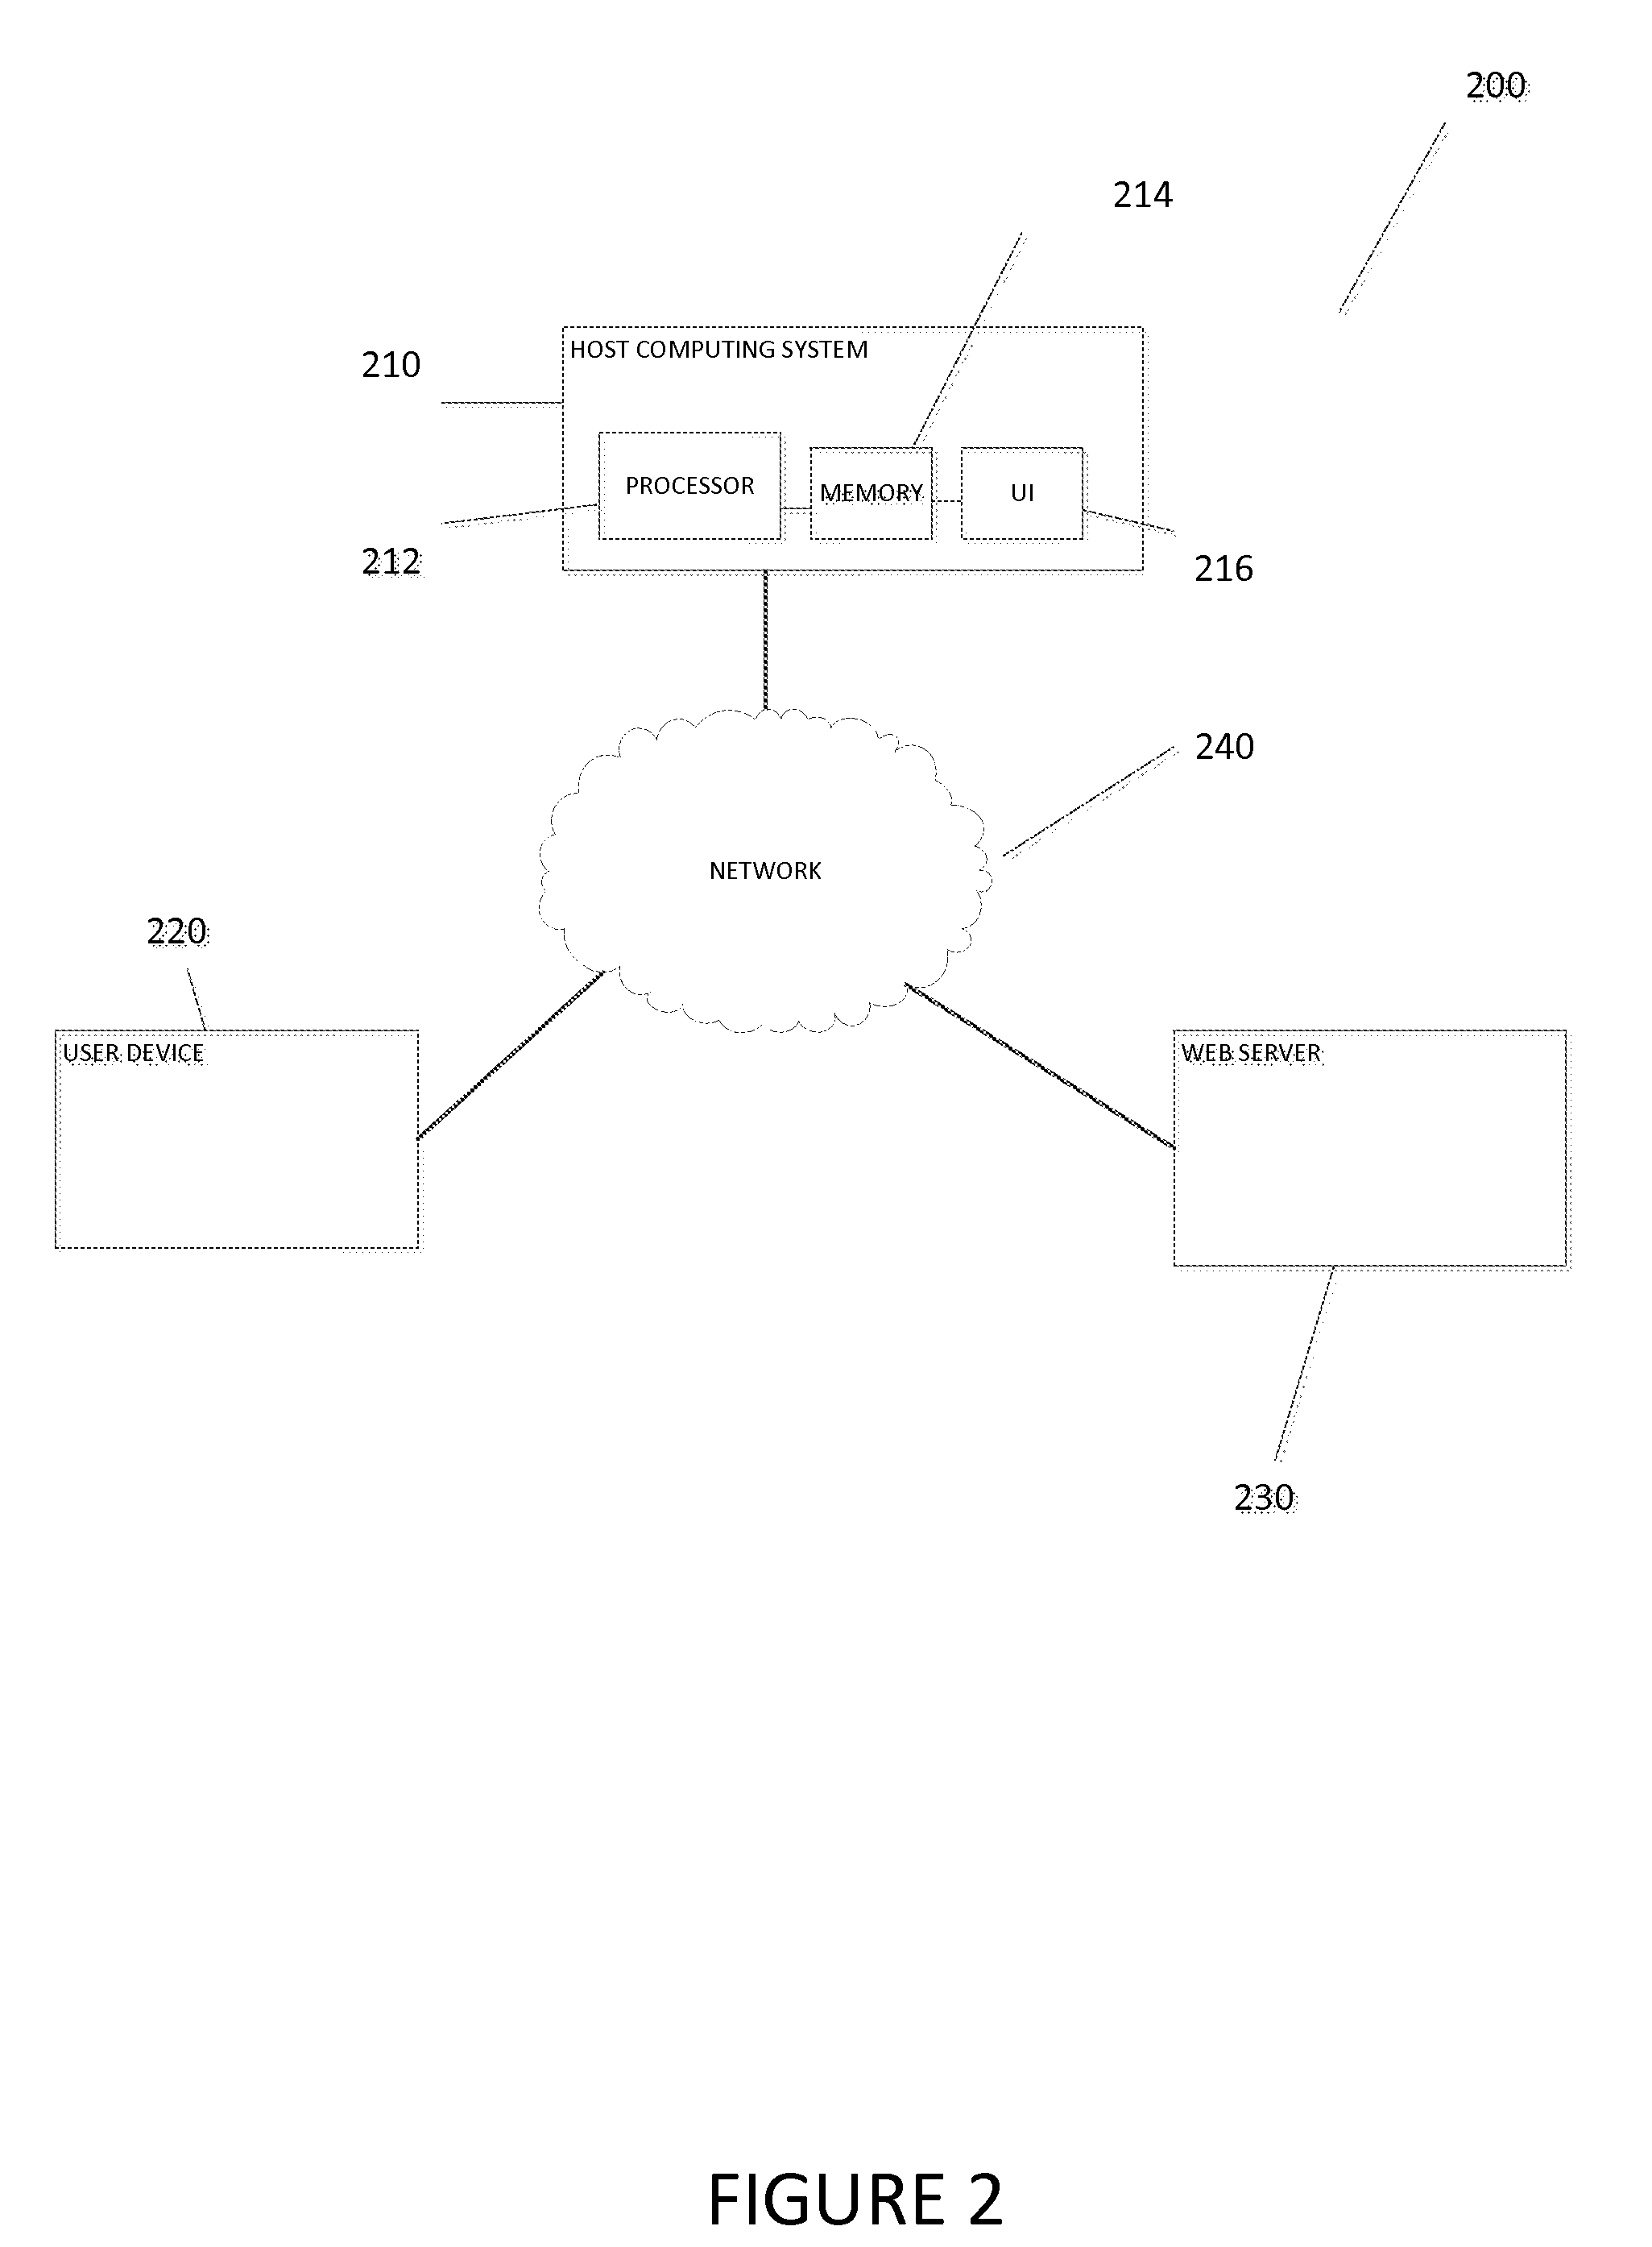 Systems and methods for determining content popularity based on searches